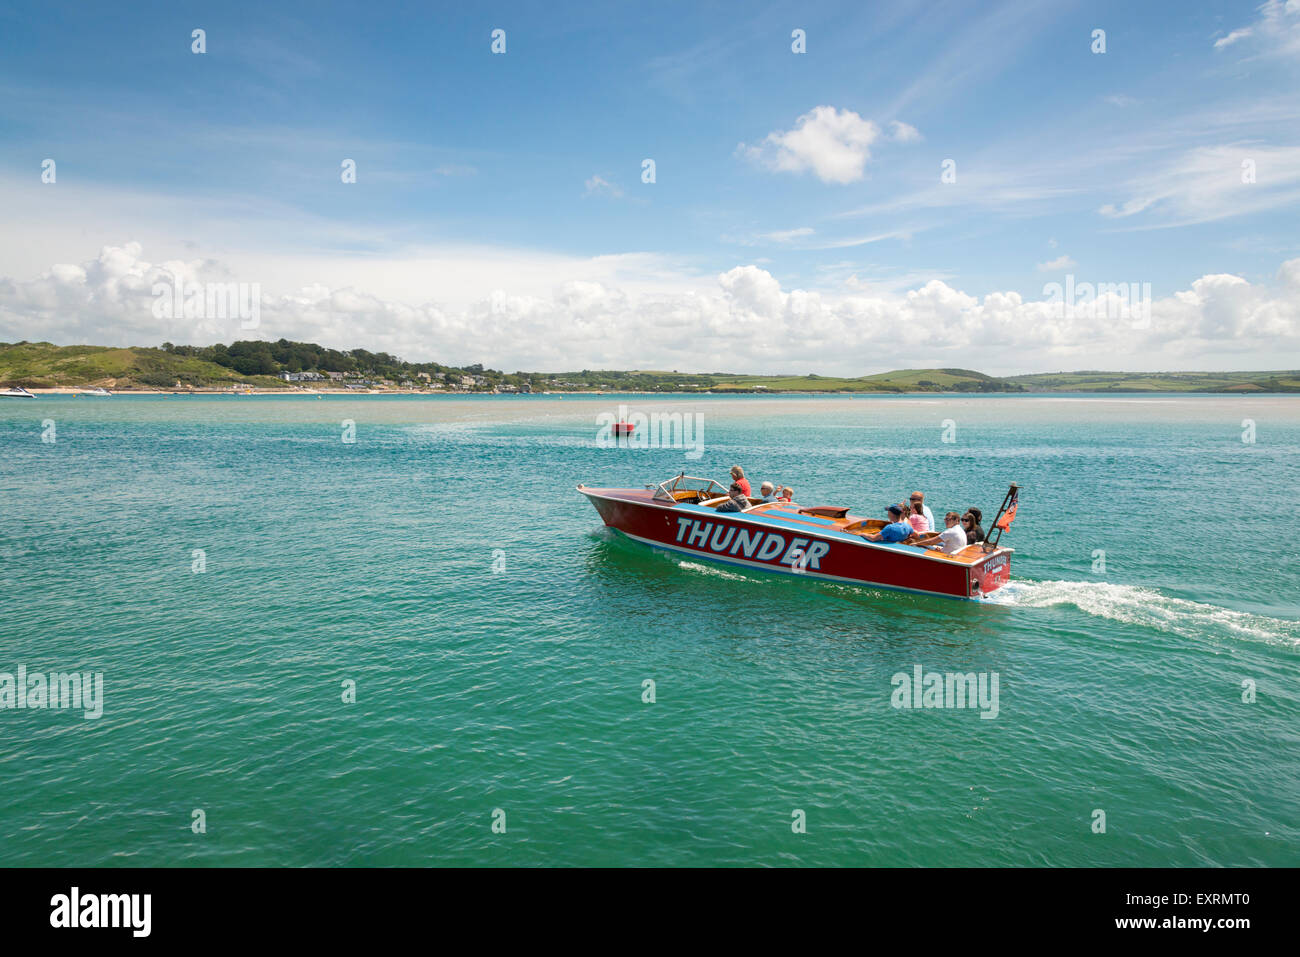 The Thunder speedboat carrying tourists on a high speed trip round the bay on the River Camel Estuary Padstow Cornwall UK Stock Photo